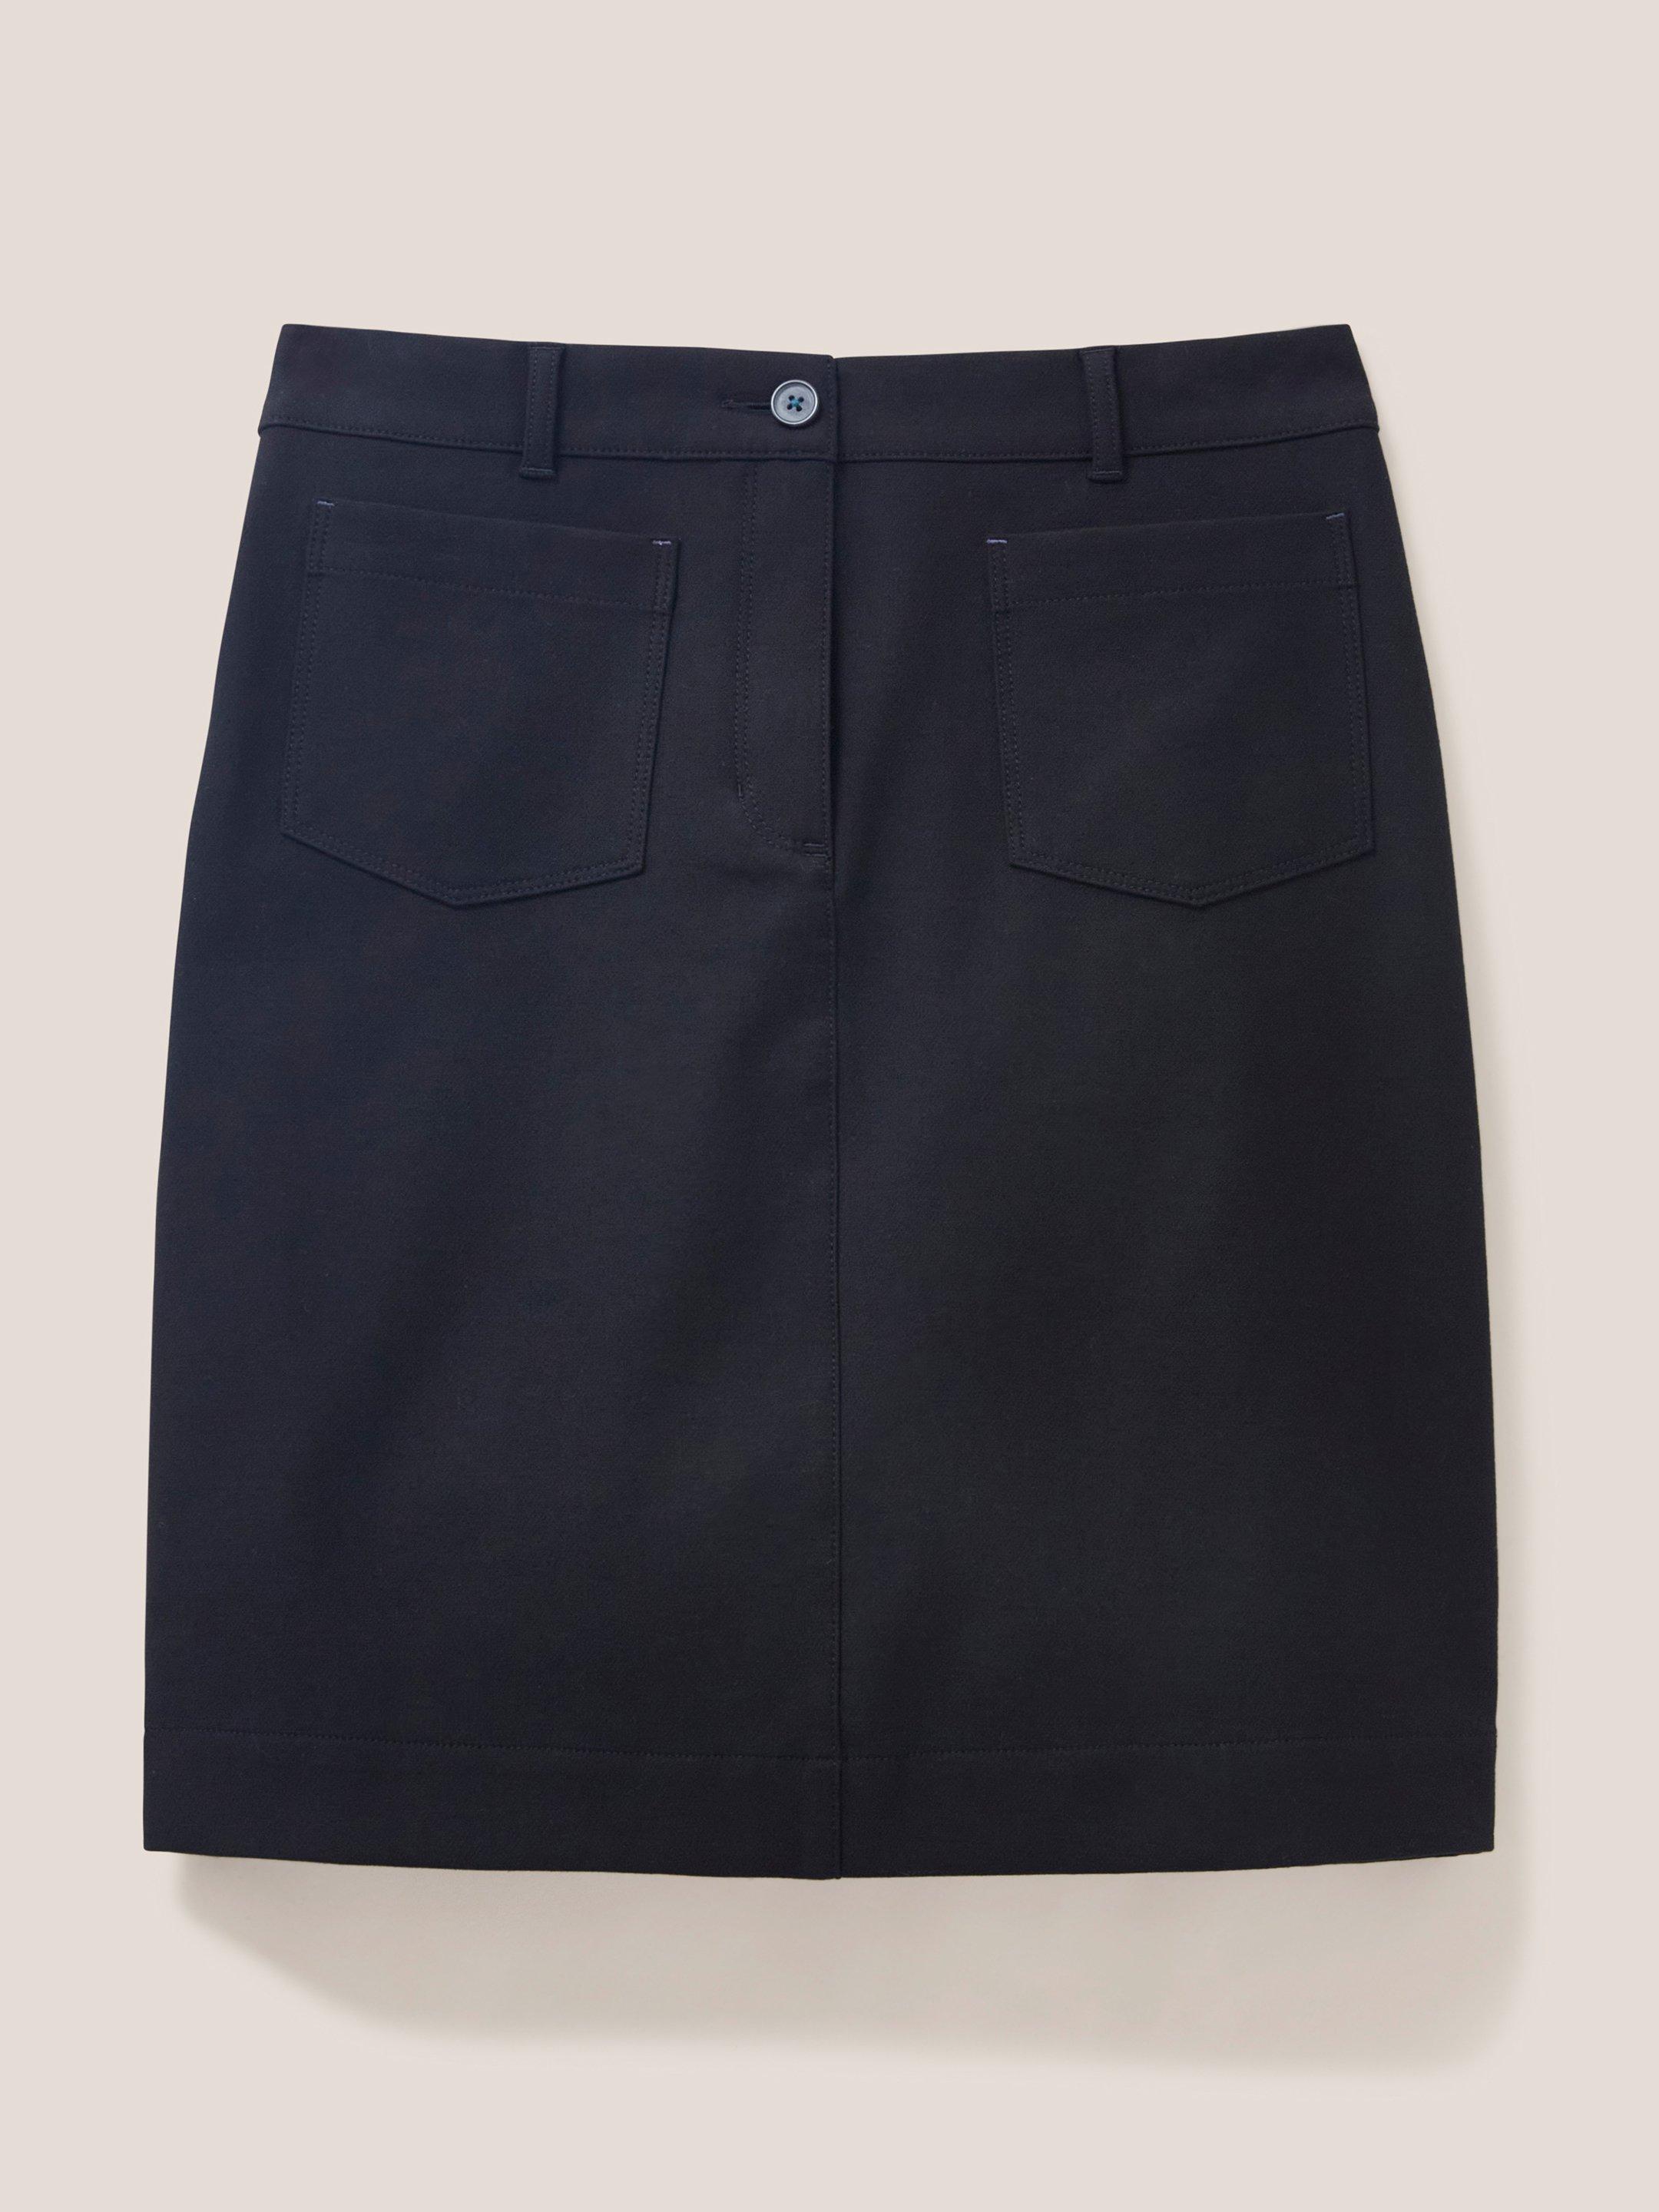 Melody Stretch Skirt in PURE BLK - FLAT FRONT